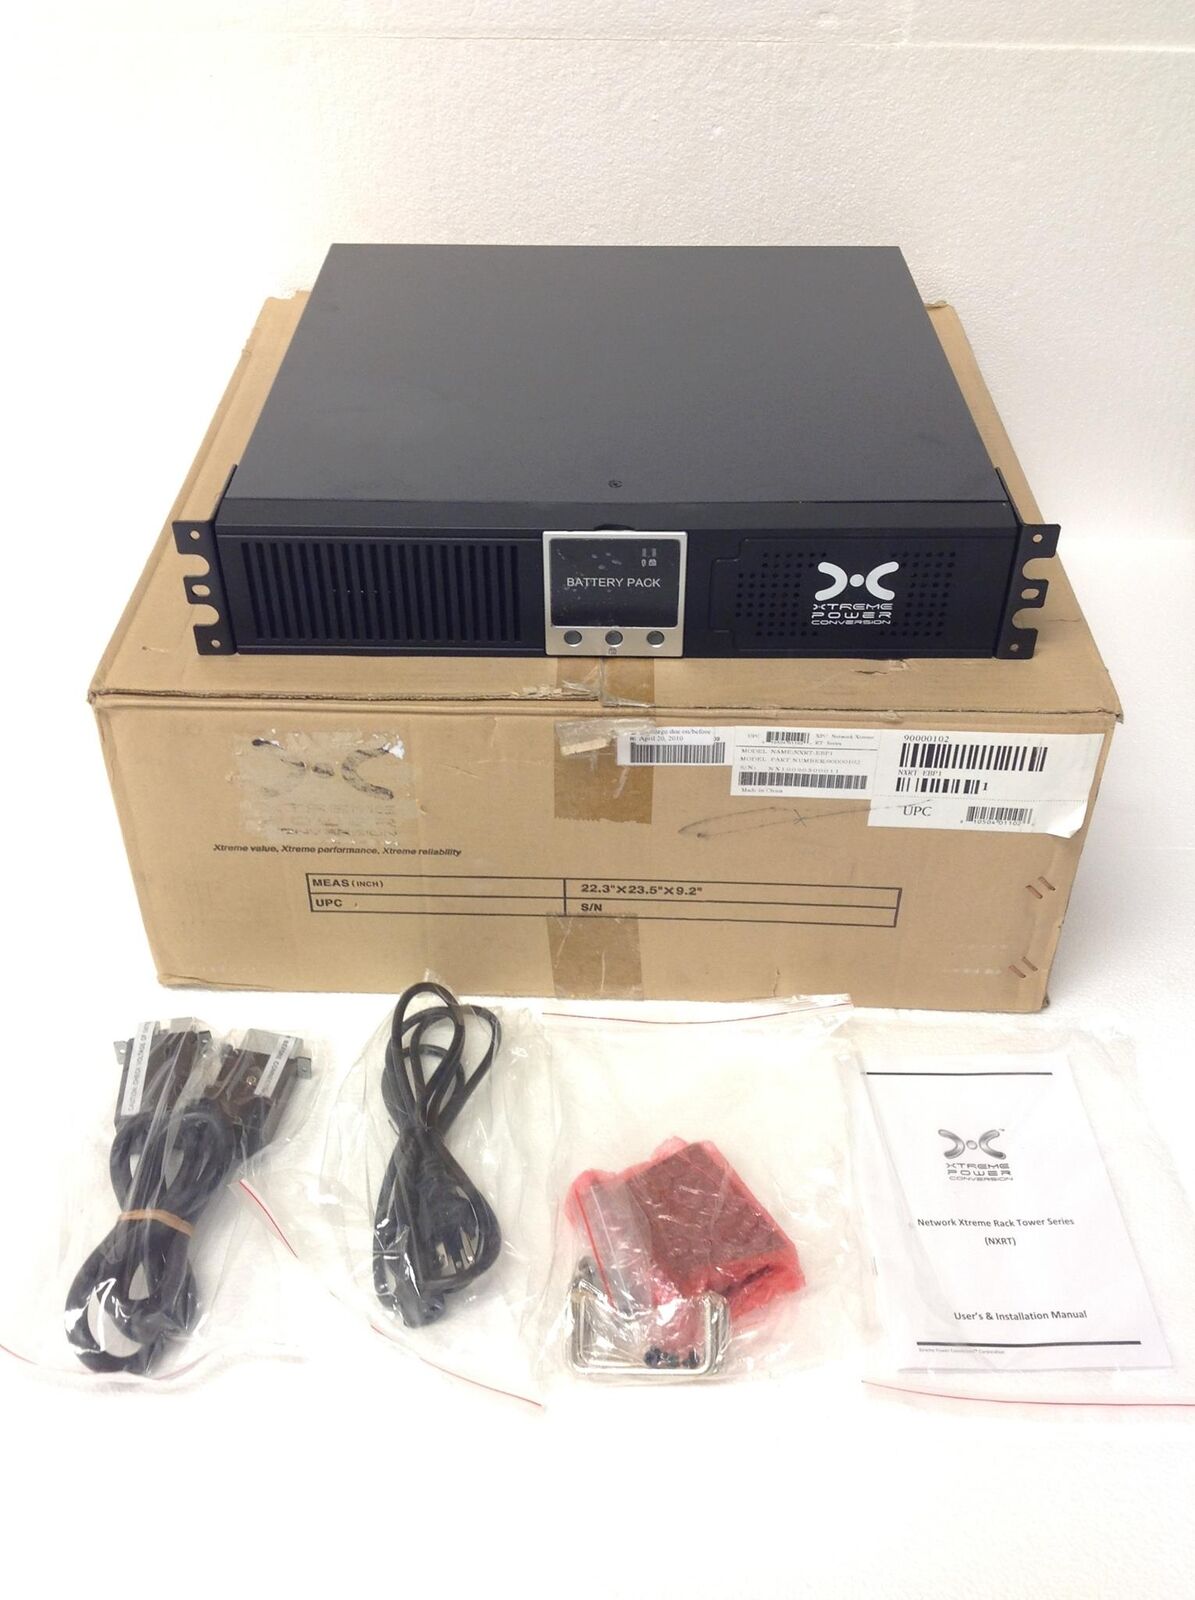 NEW Xtreme Power Conversion NXRT-EBP1 UPS Battery Pack w/Battery/Screws/Cable